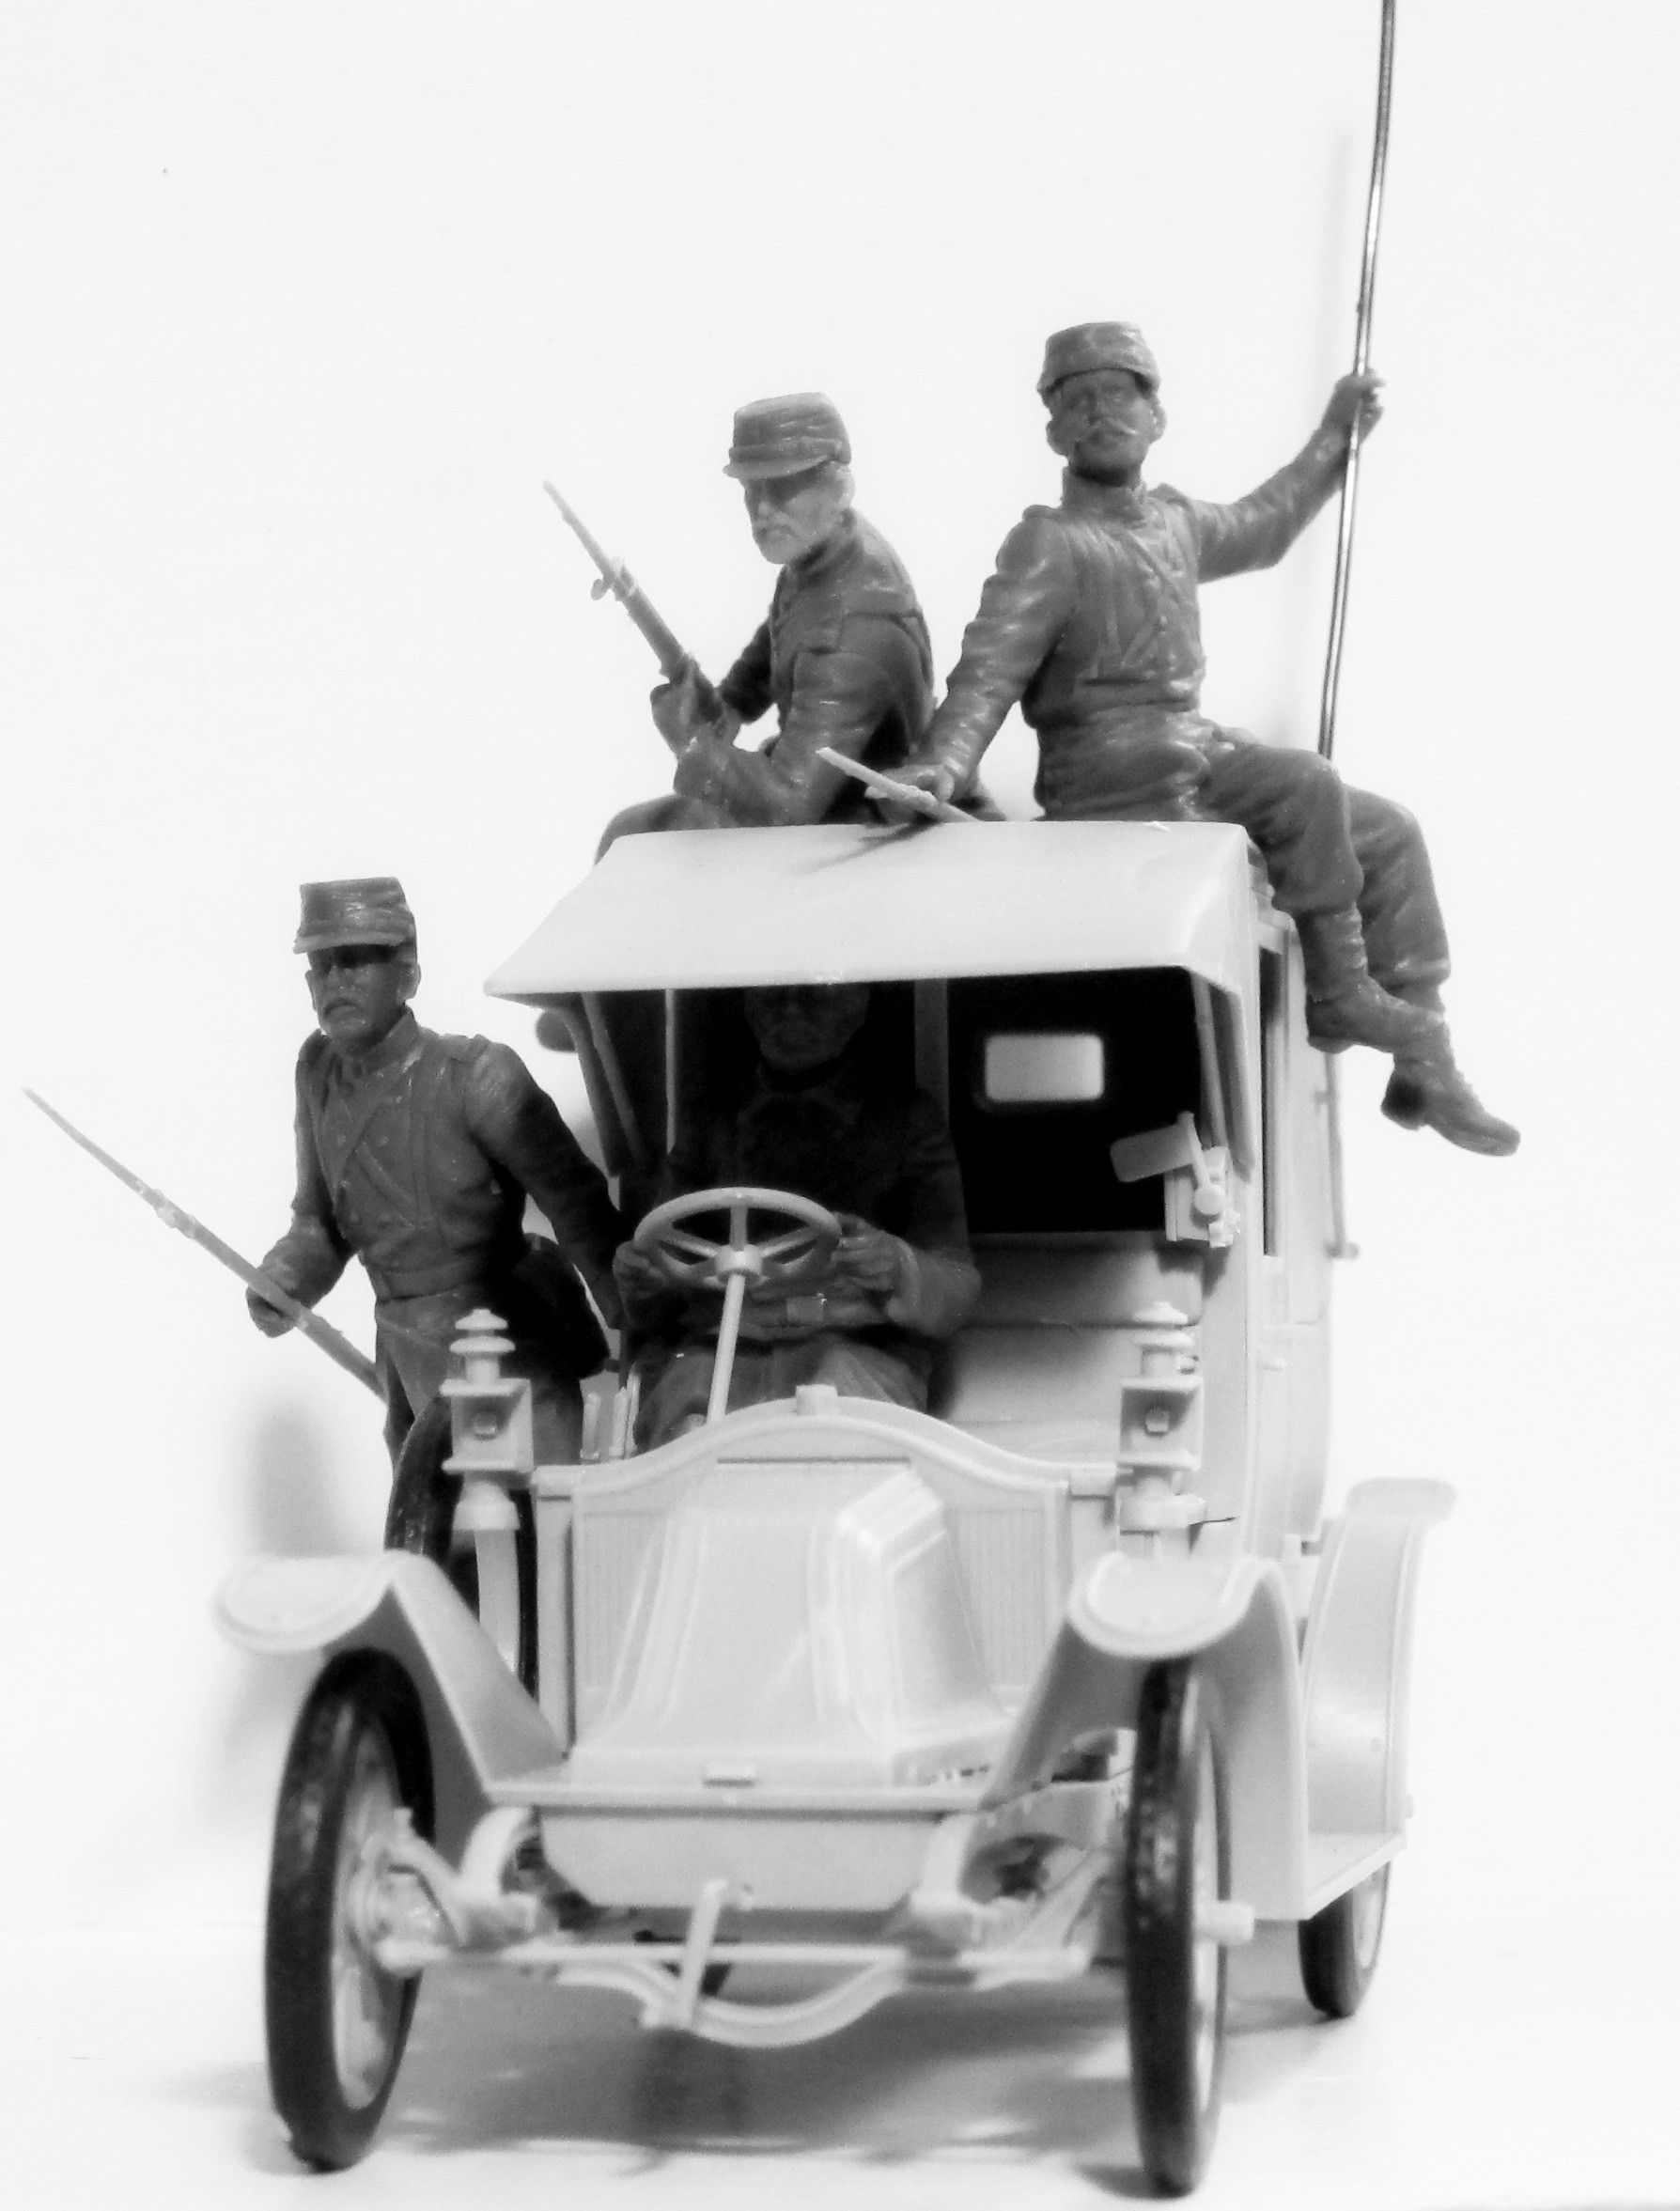 1/35 35705 Французская пехота на марше (1914 г.) \ French Infantry on the march (1914) (4 figures) (100% new molds)